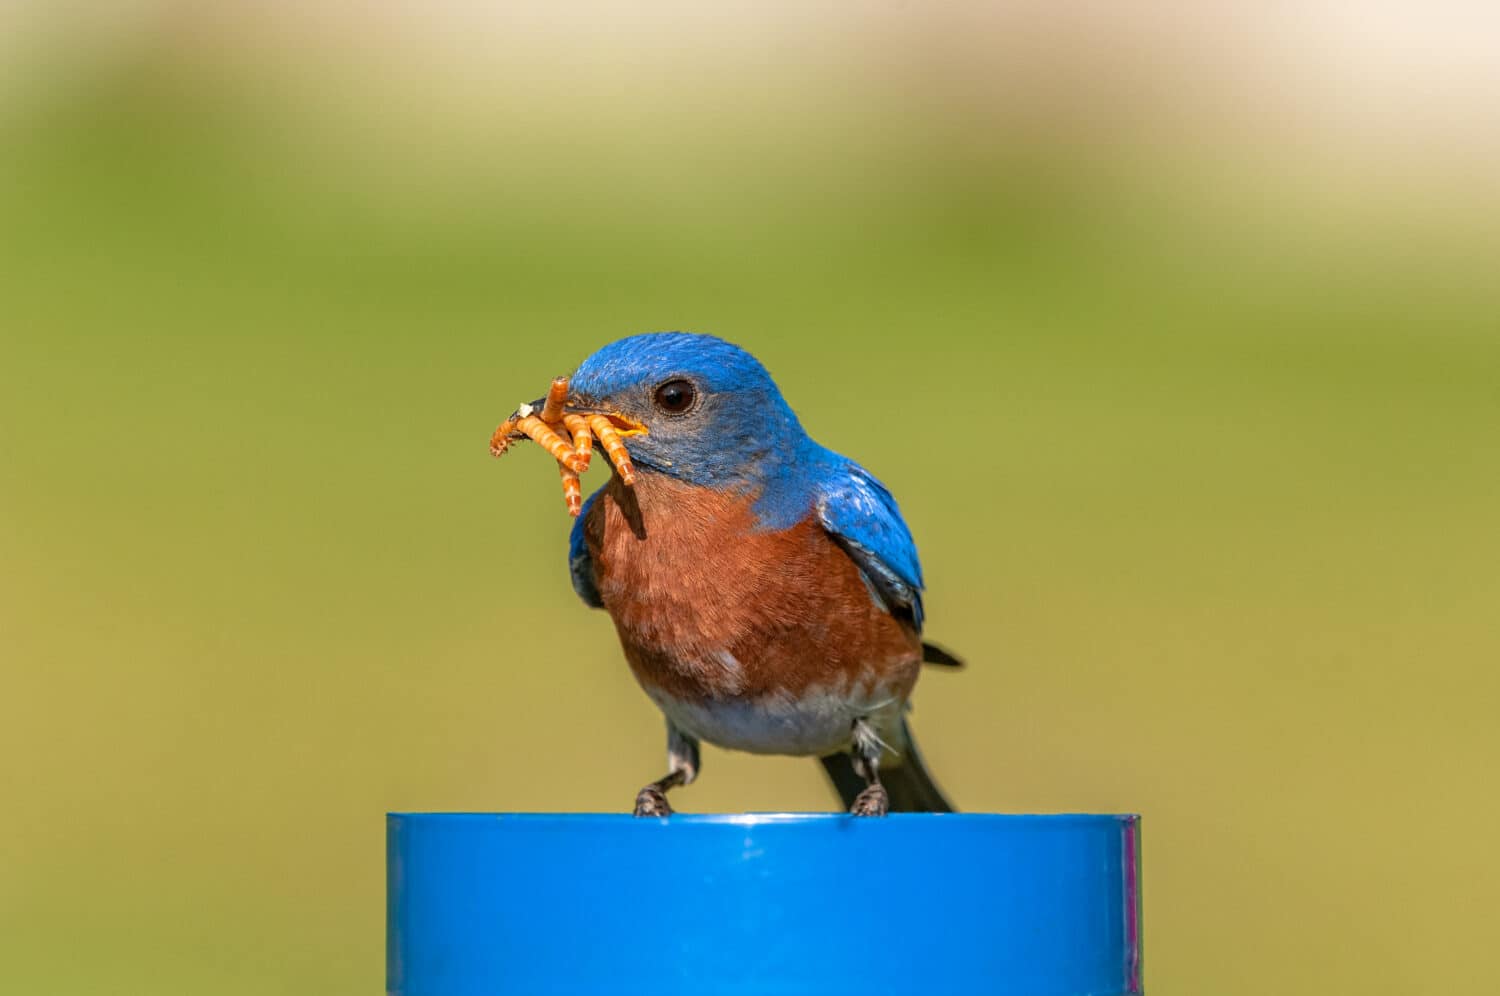 A male Eastern Bluebird (Sialia sialis)  gathers up mealworms, from a feeder, for its young.